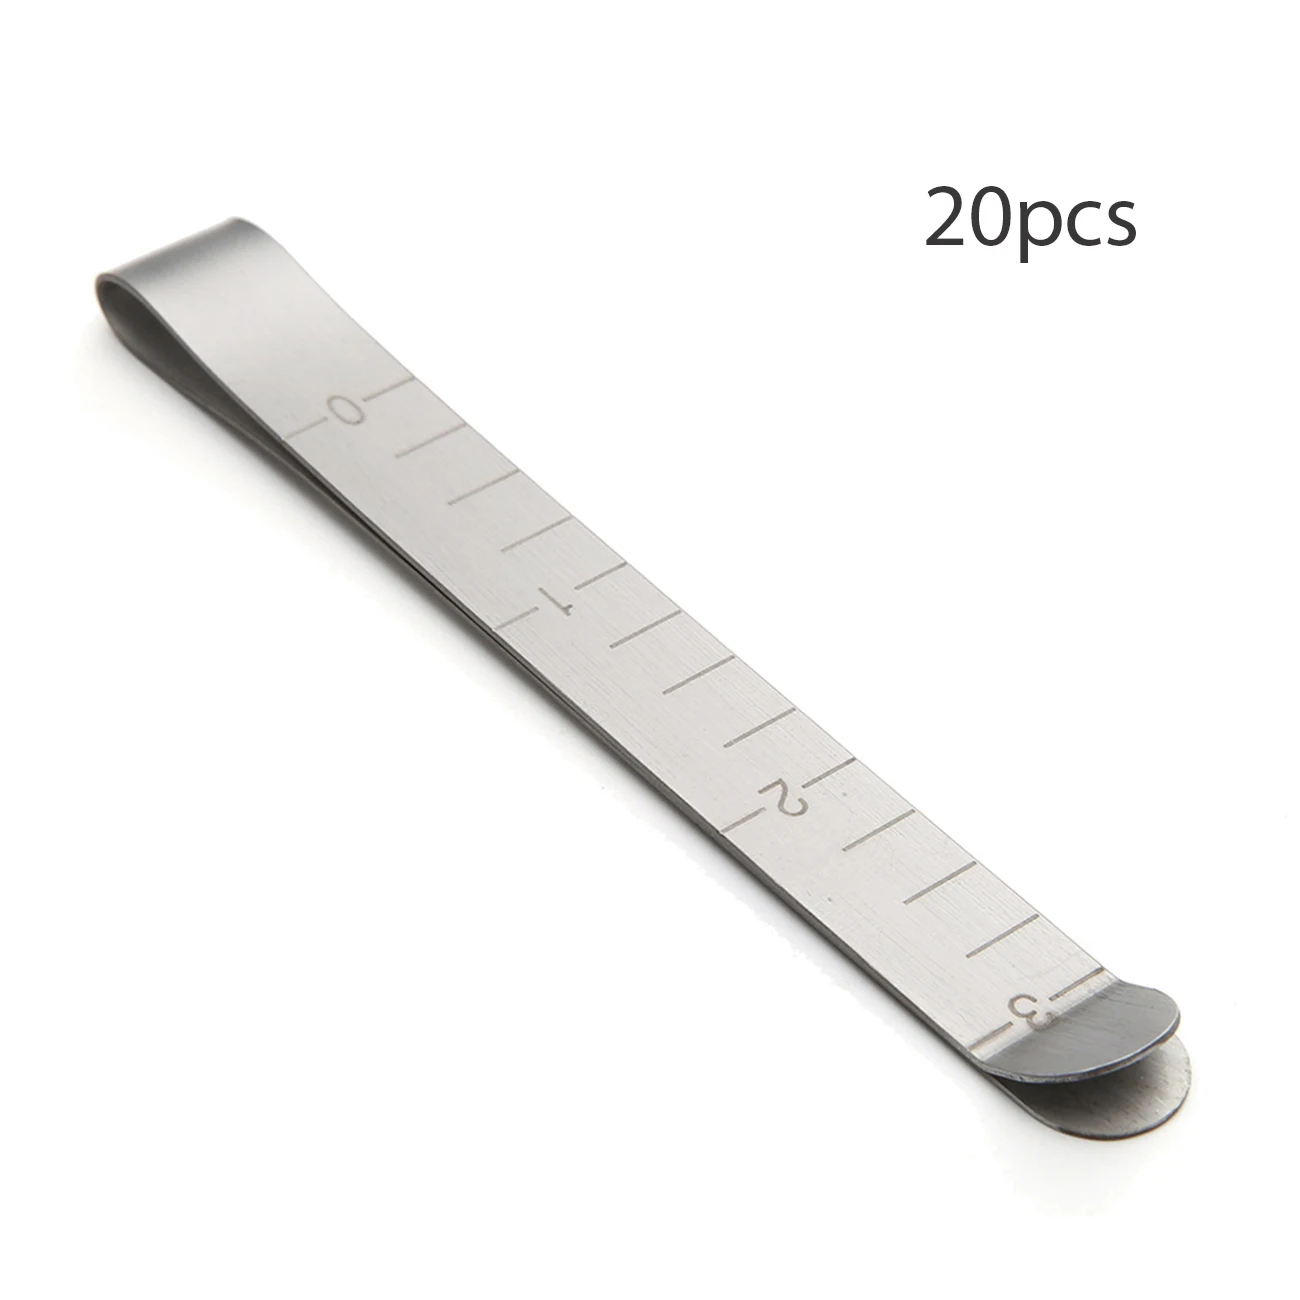 

20Pcs Metal Sewing Crimping Clip Stainless Steel Hemming Clips With Built-in Ruler Cloth Measurement Ruler